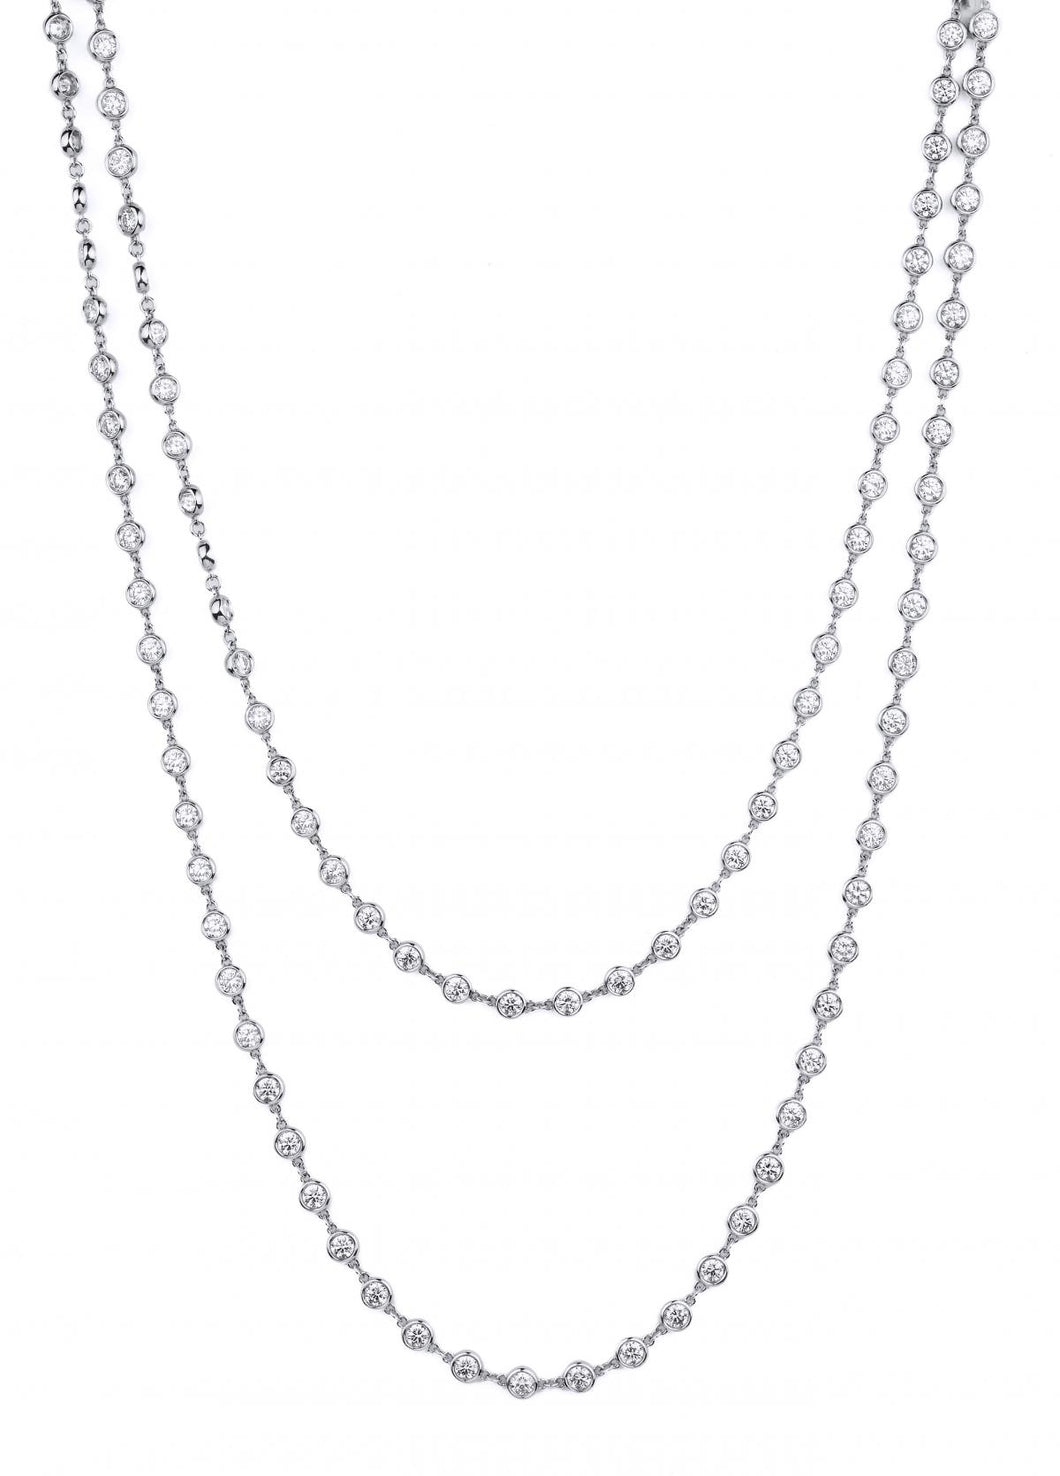 18k White Gold 16.8 Carat Diamonds by the Yard Chain Necklace